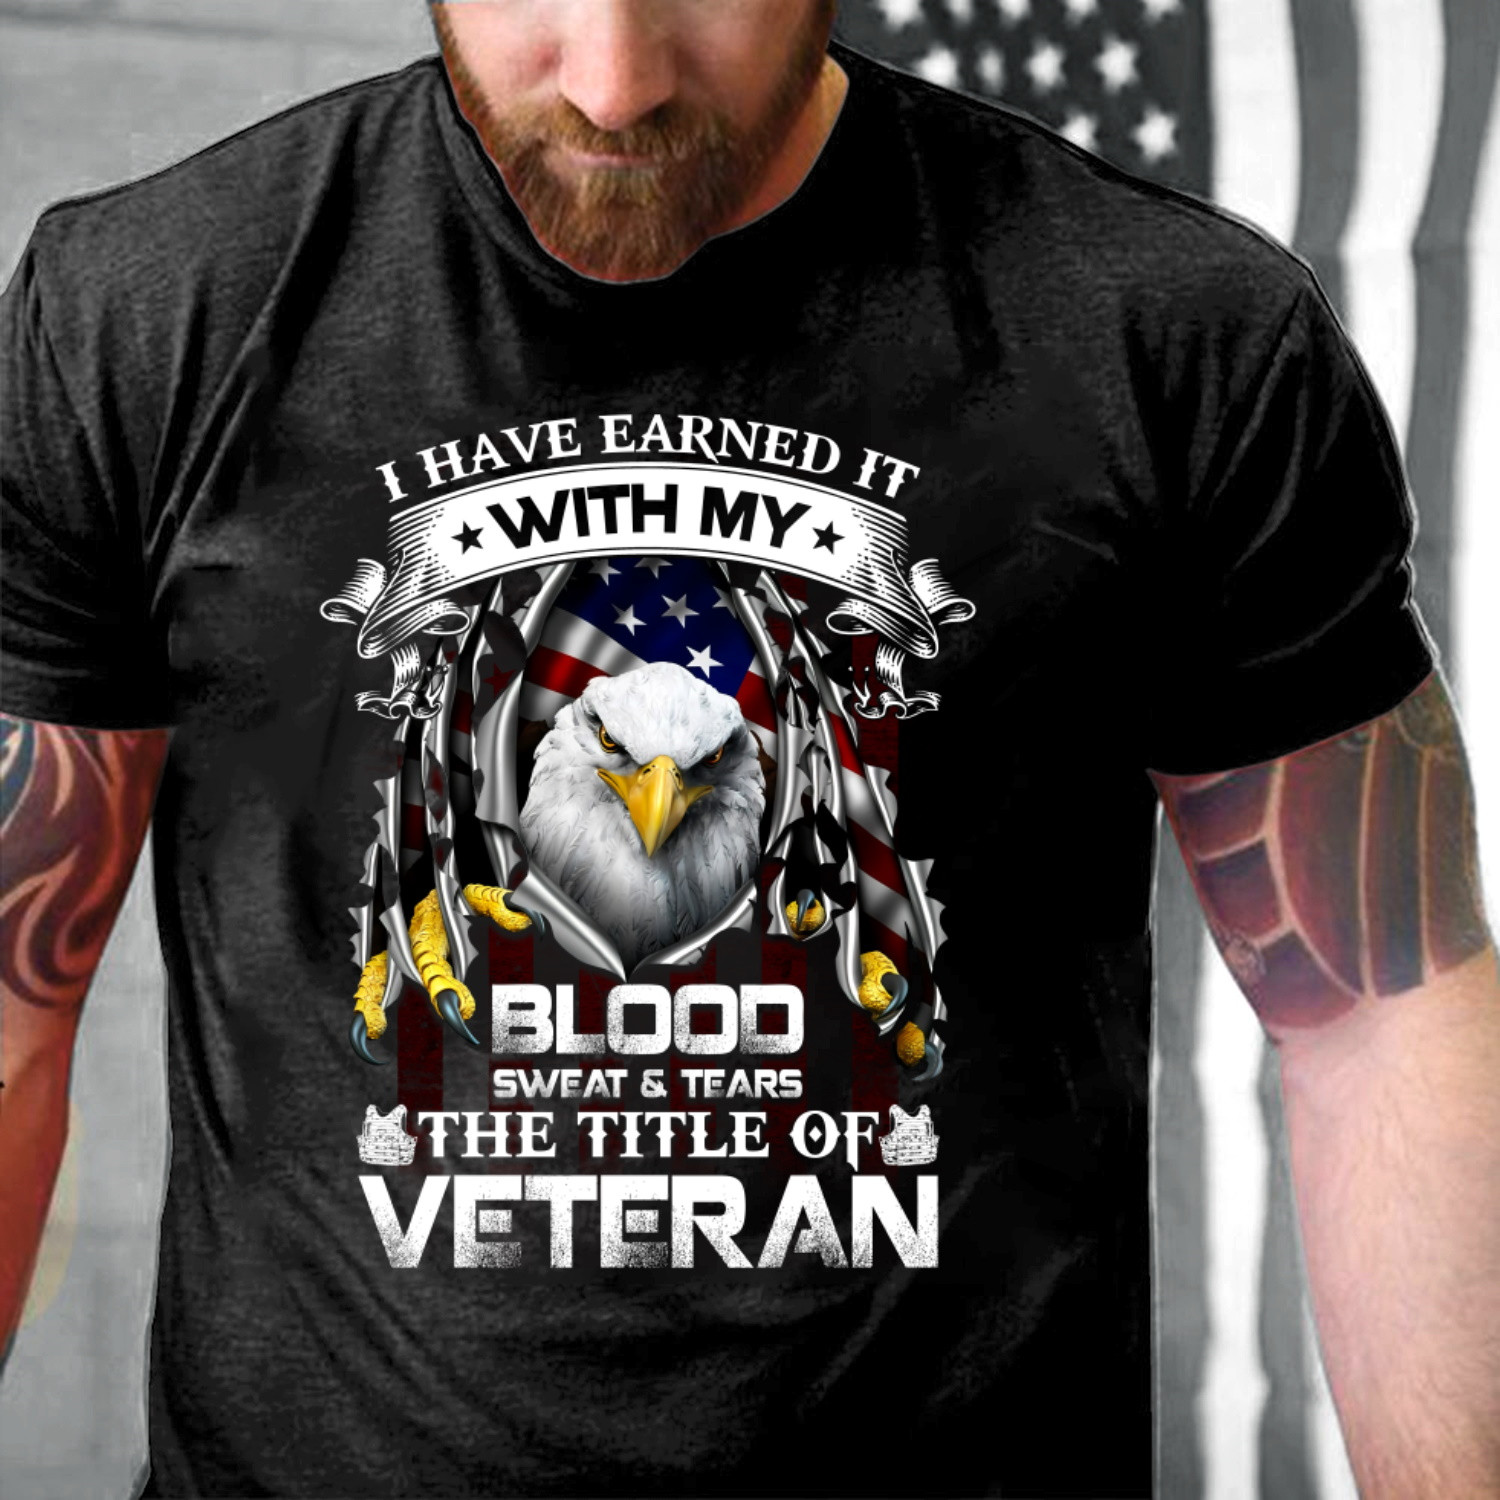 Veteran Shirt, I Have Earned It With My Blood Sweat & Tears, The Title Of Veteran T-Shirt